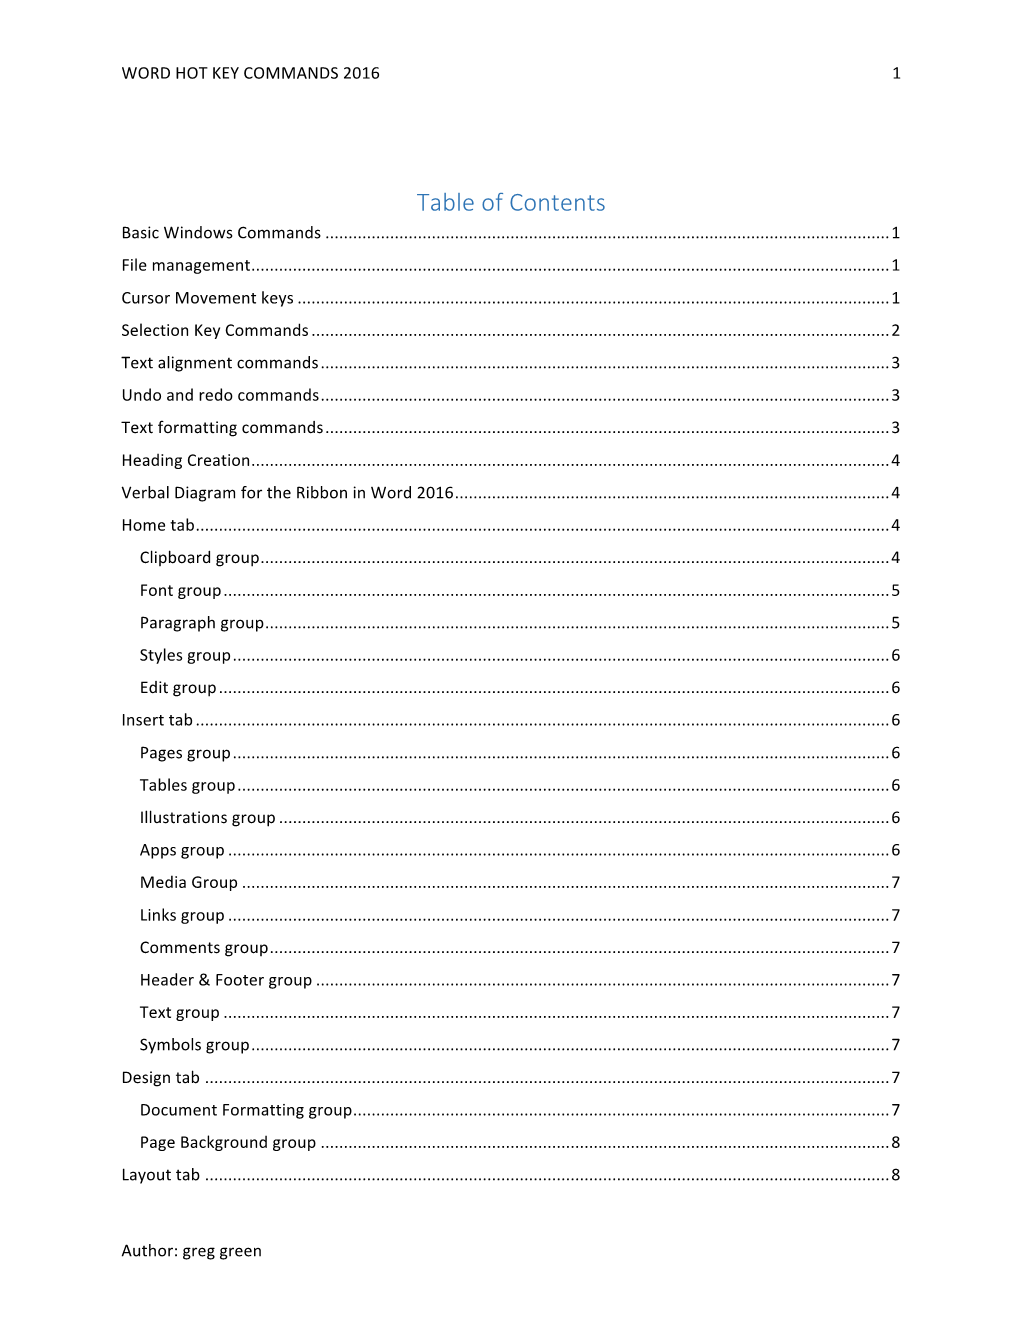 Table of Contents Basic Windows Commands